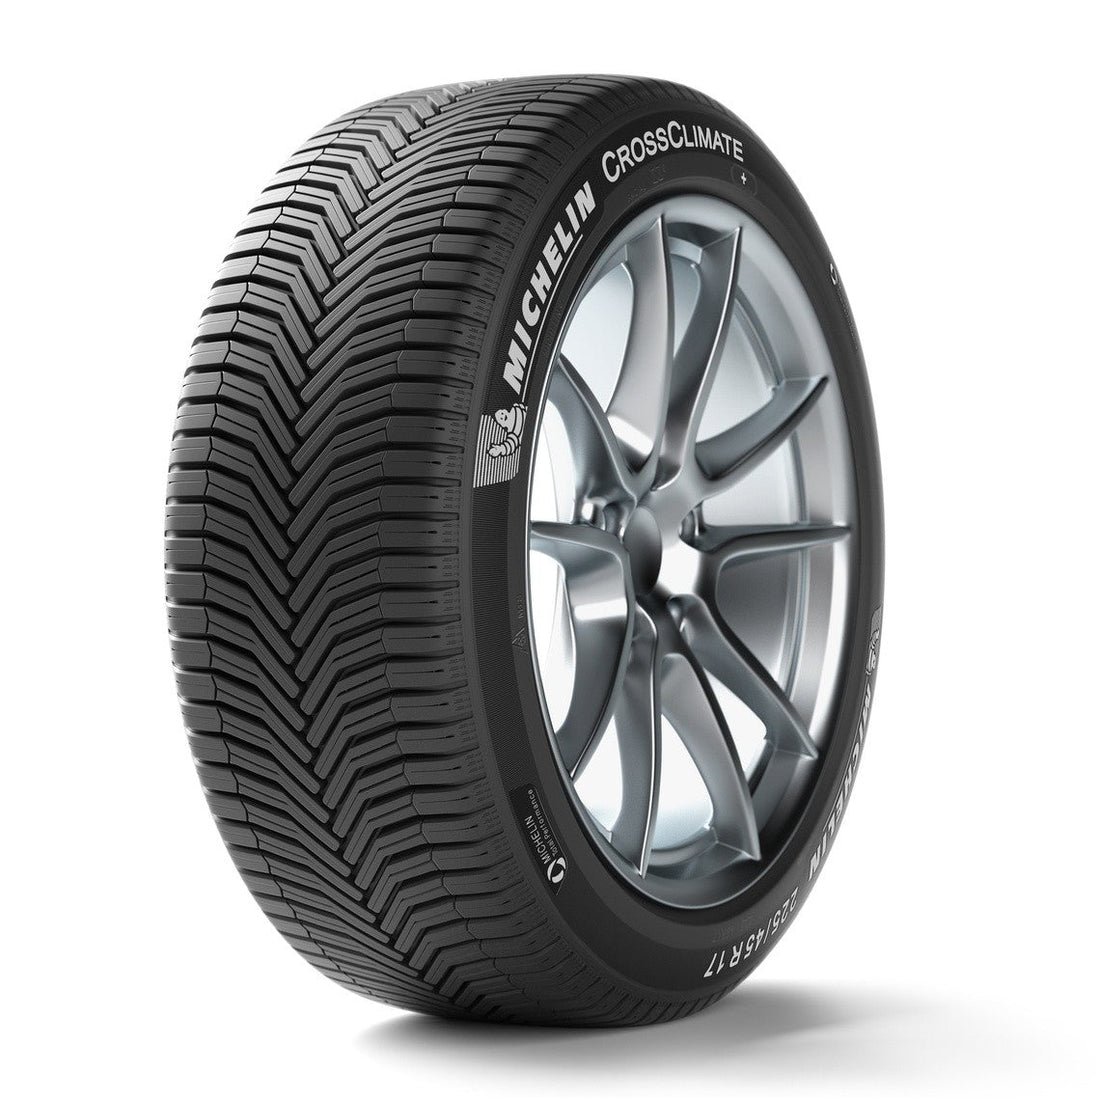 Anvelope All season Michelin CROSSCLIMATE 175/60R15 85 H Anvelux